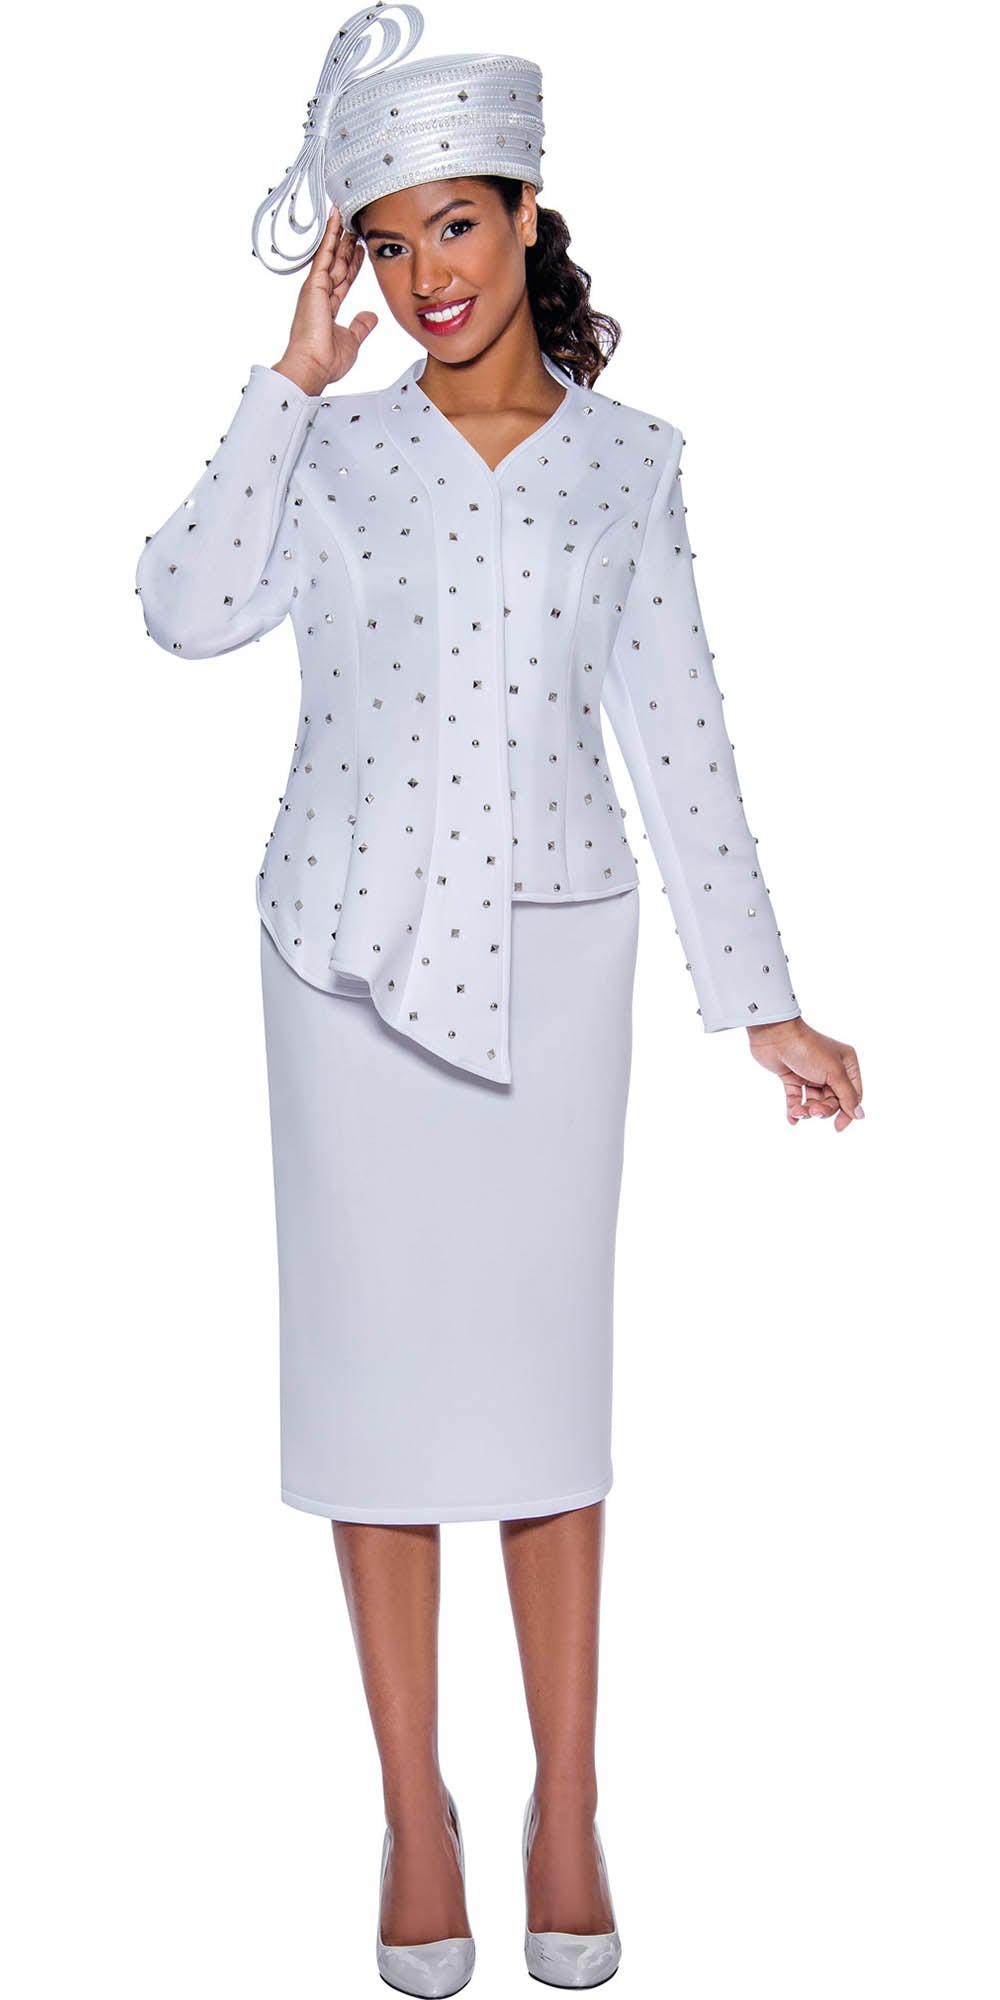 GMI G9052 - White 2PC Skirt Suit with Stud Embellishments